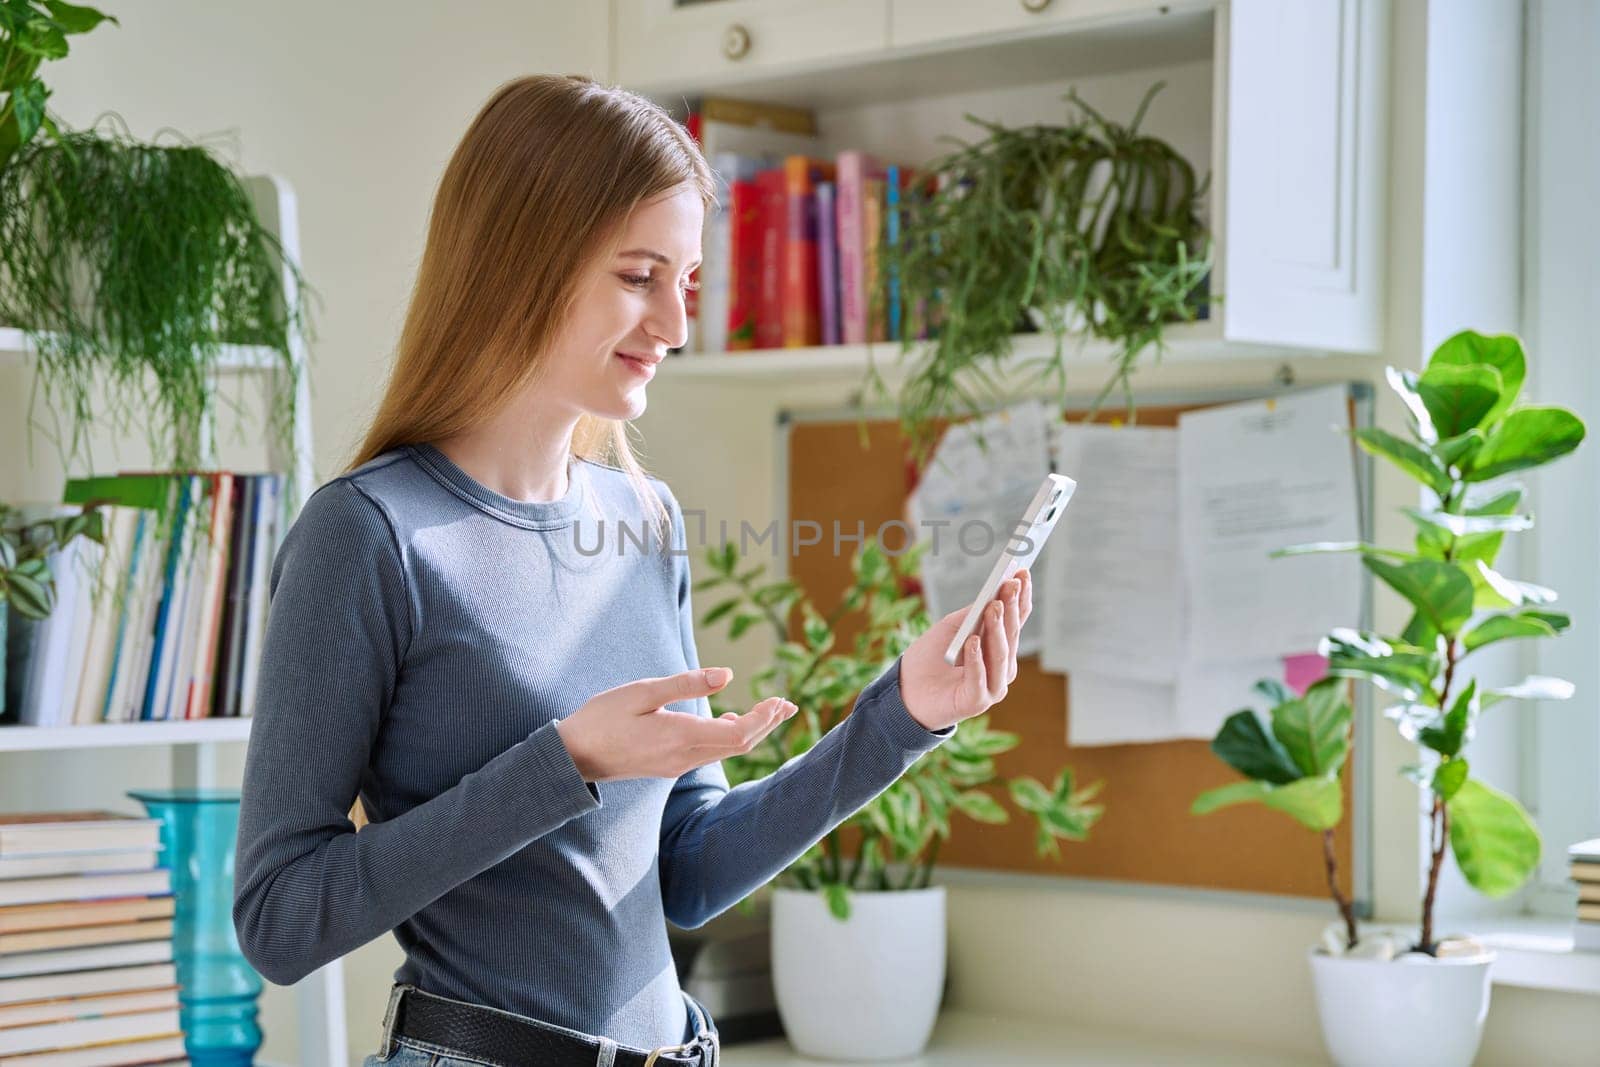 Young teenage female using smartphone for video conversation, home interior. Talking teenage girl looking at the phone screen, online video chat conference call. Technology, communication, leisure